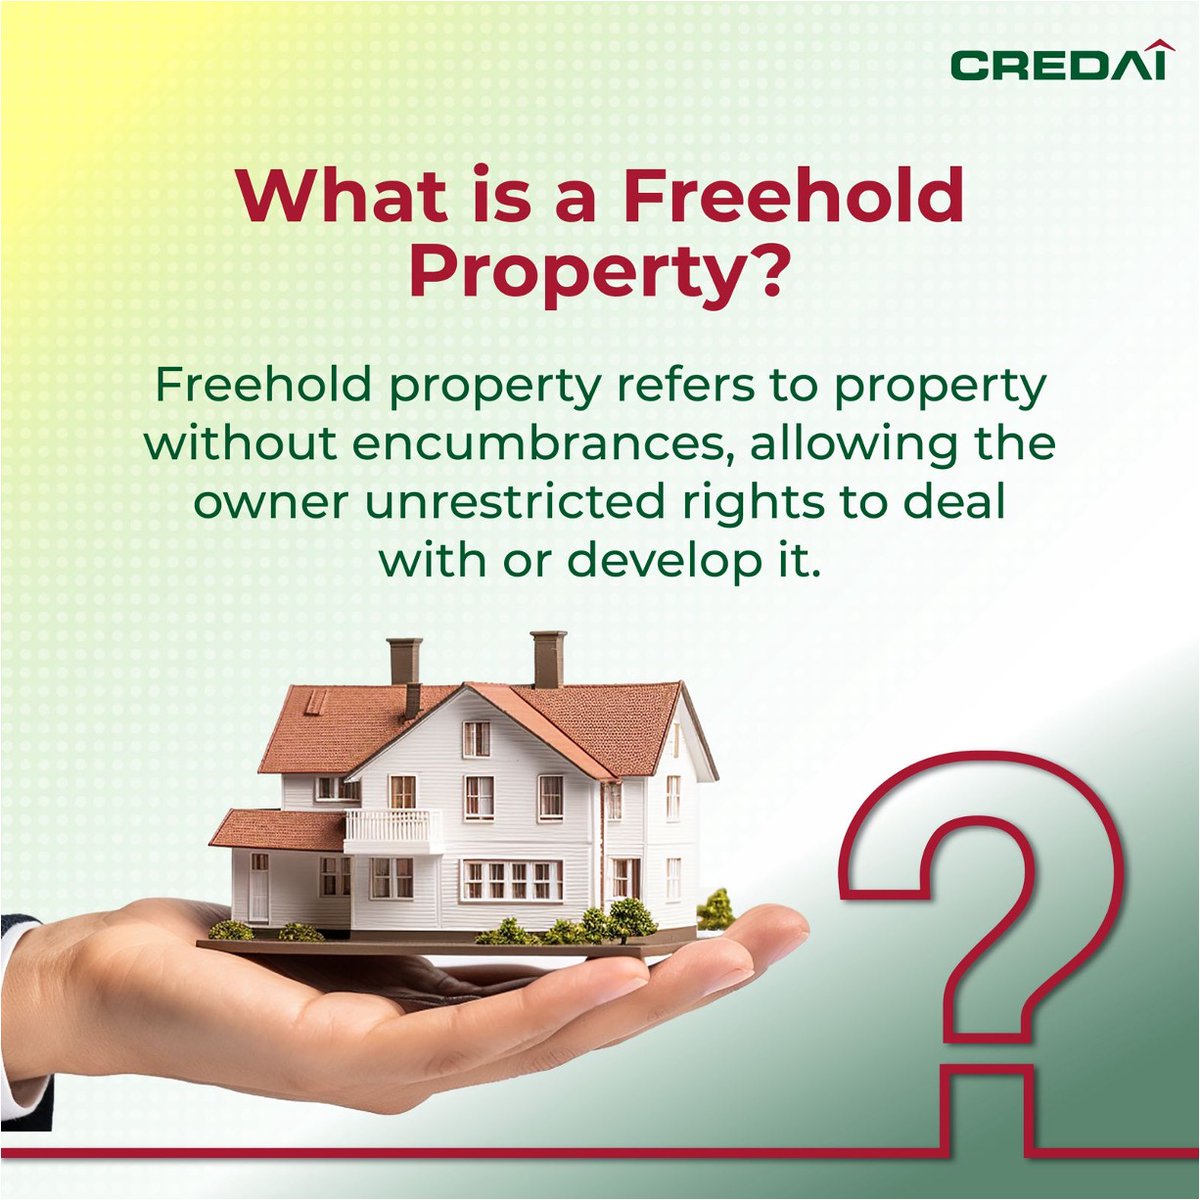 Understanding Freehold Property: Ownership without limitations or encumbrances. #CREDAI #CREDAINational #FreeholdProperty #RealEstateOwnership #PropertyInvestment #RealEstateTips #PropertyLaw #HomeOwnership @MCHI_President @CREDAINational @CREDAIPresident @bani_g_anand